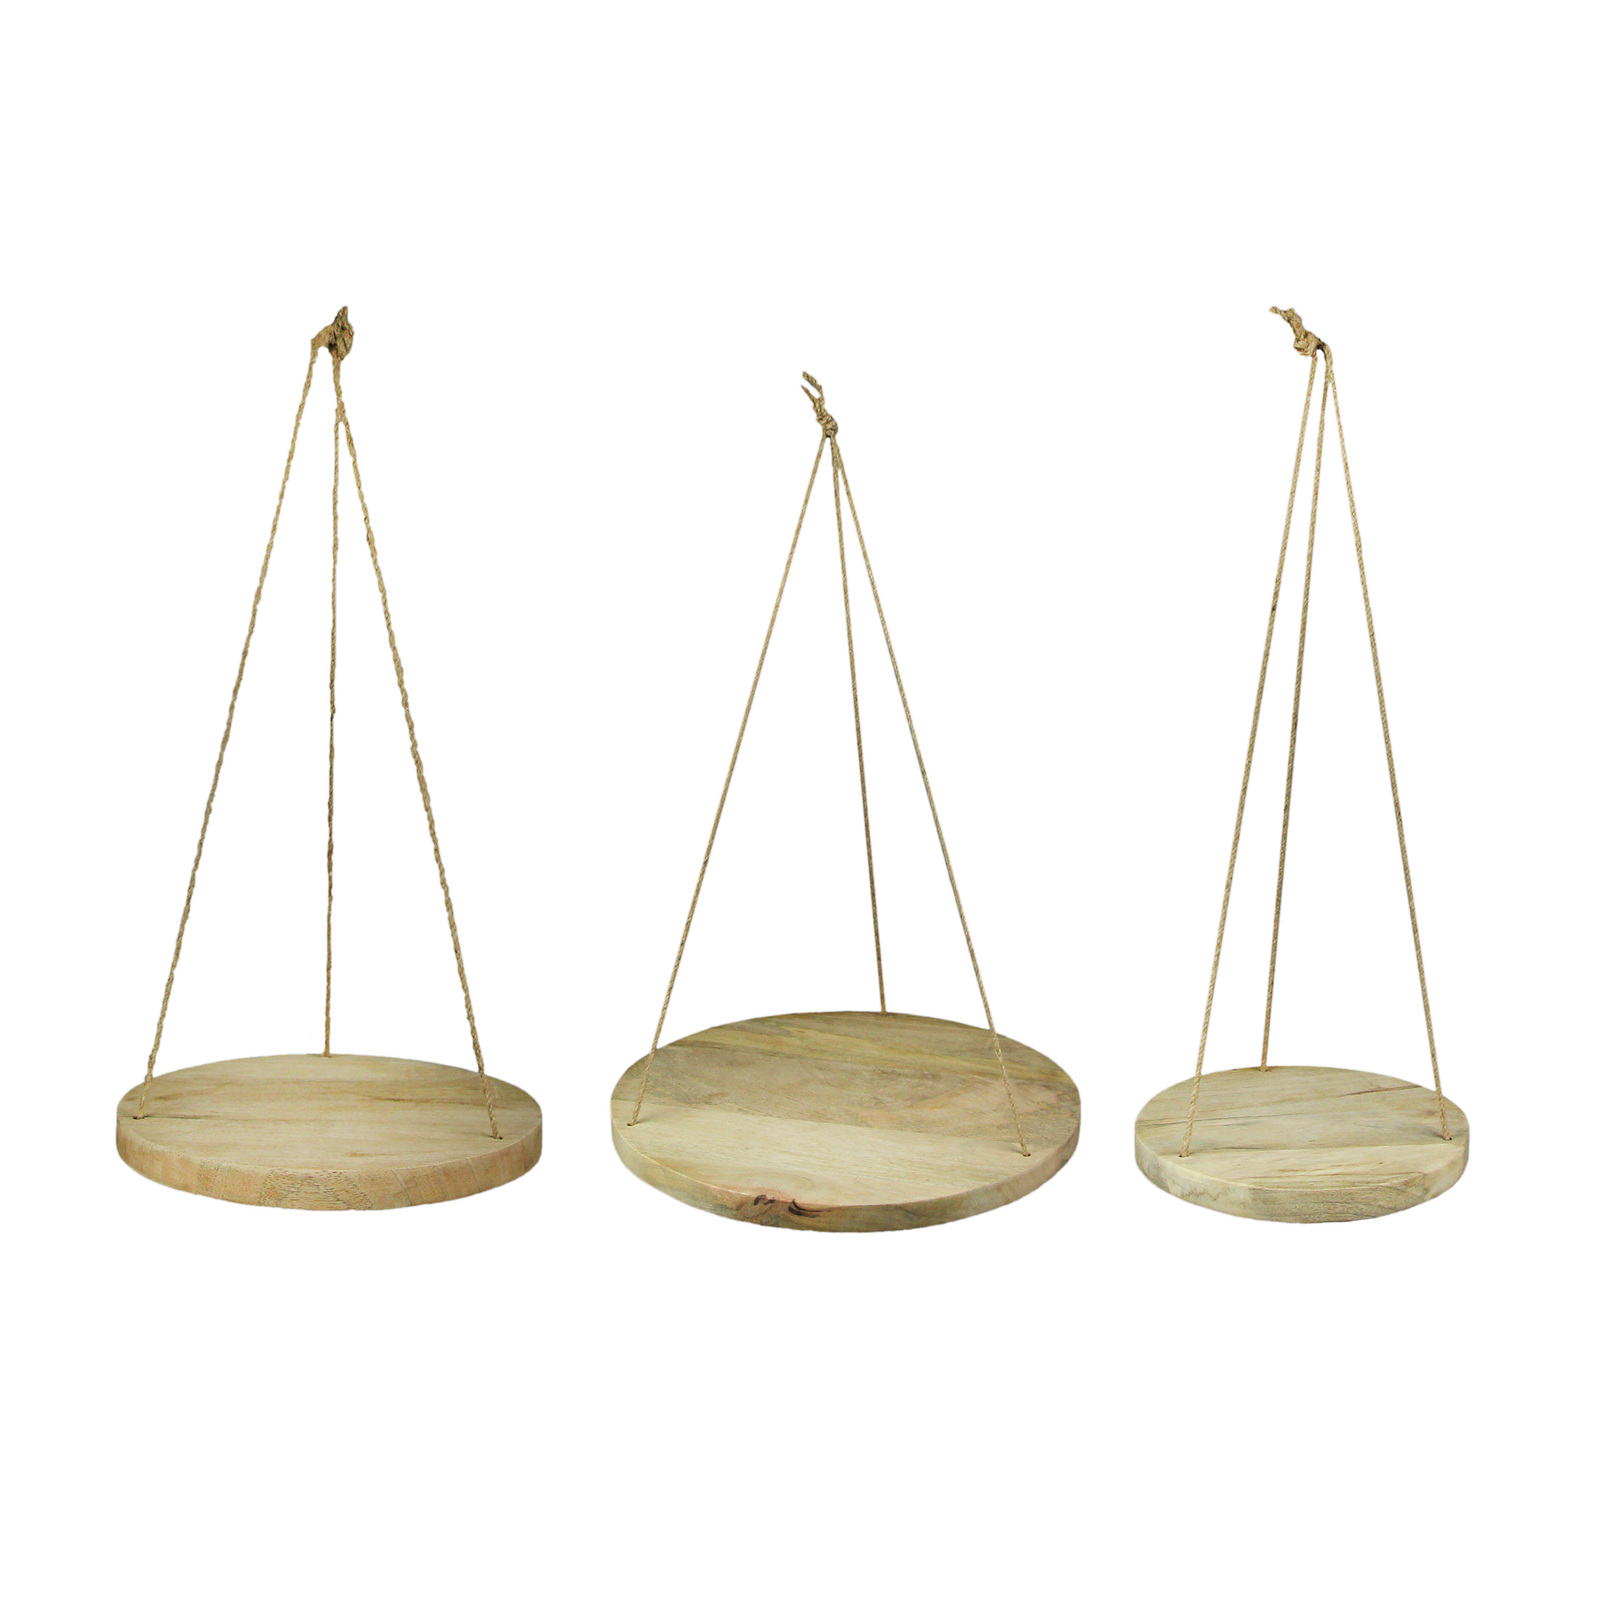 Primary image for Set of 3 Primitive Country Wooden Disc and Jute Rope Hanging Plant Stands